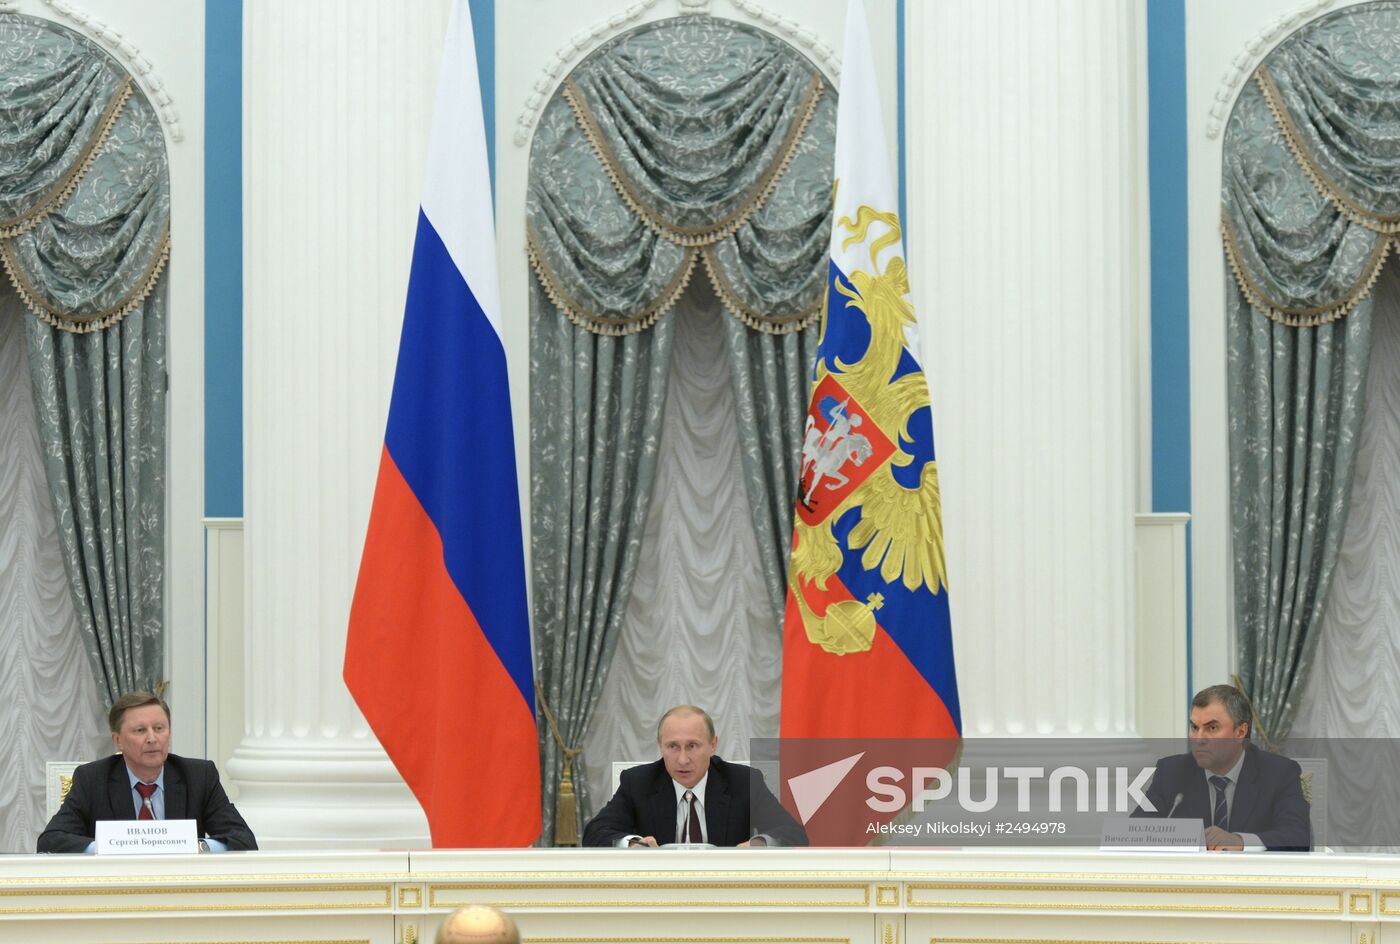 Vladimir Putin meets with elected governors of Russia's regions